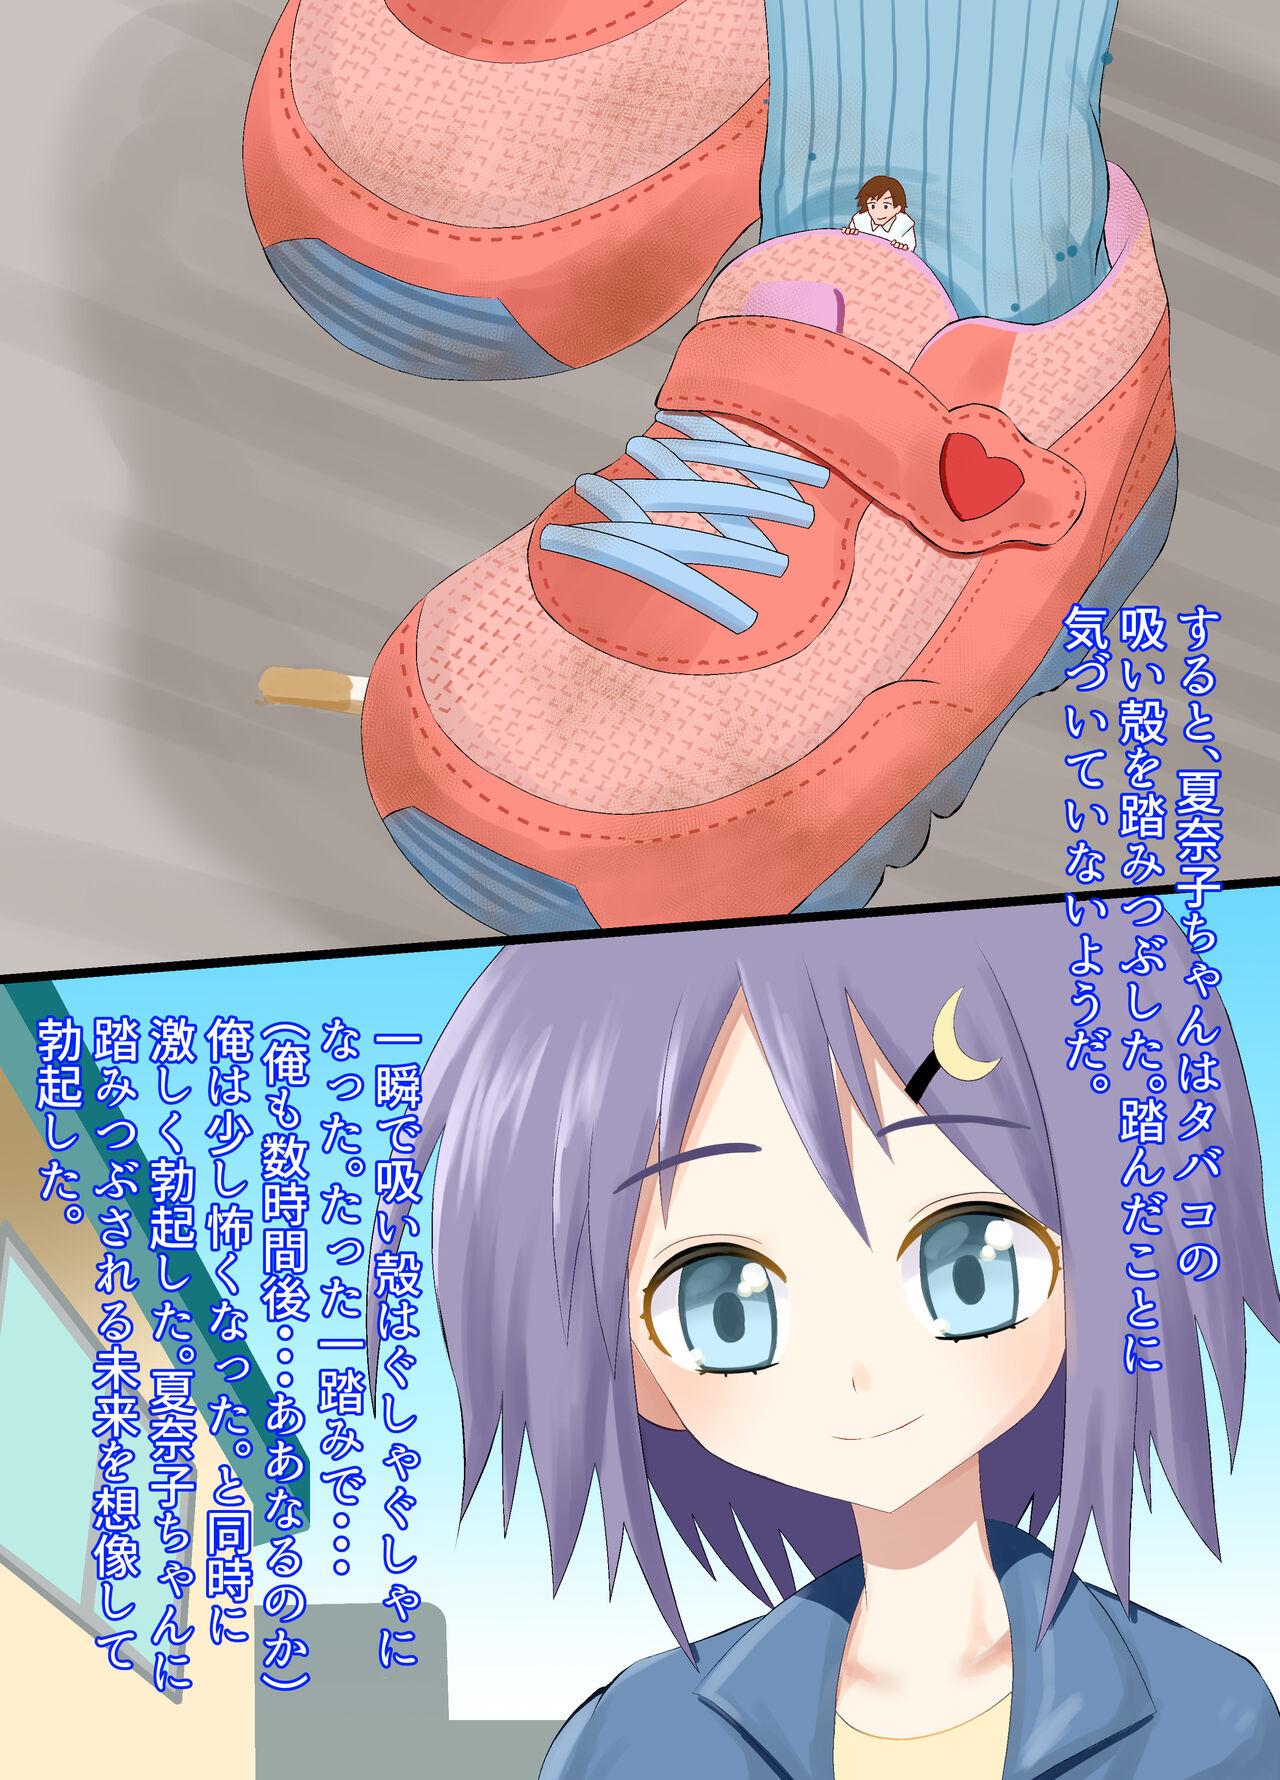 Facebook A CG collection of getting smaller and being stepped on by a girl - Original Cavalgando - Page 8